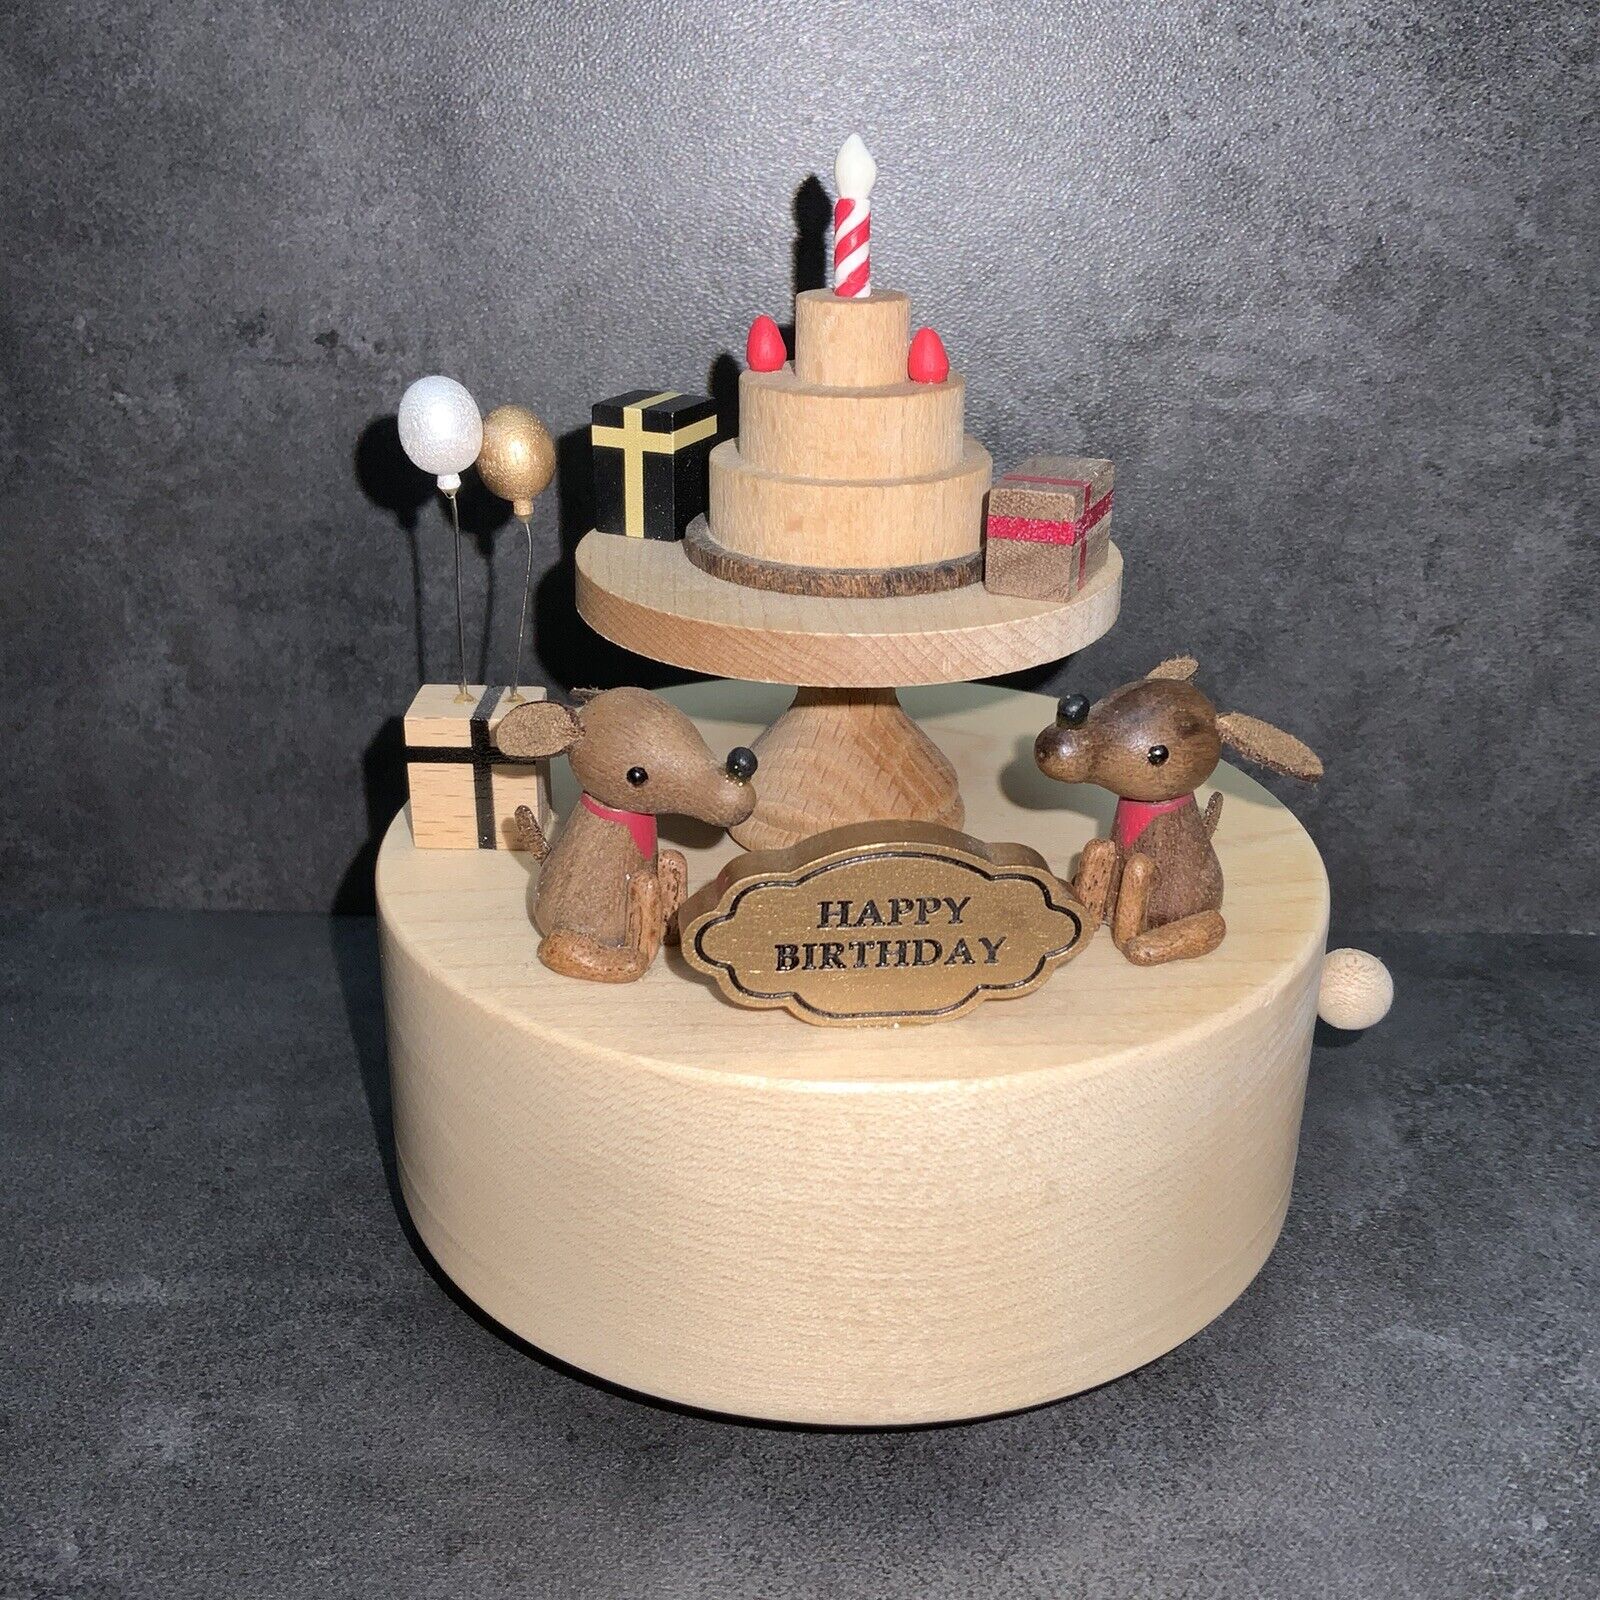 Wooderful Life Collectible Music Box Birthday Cake Handcrafted Wood